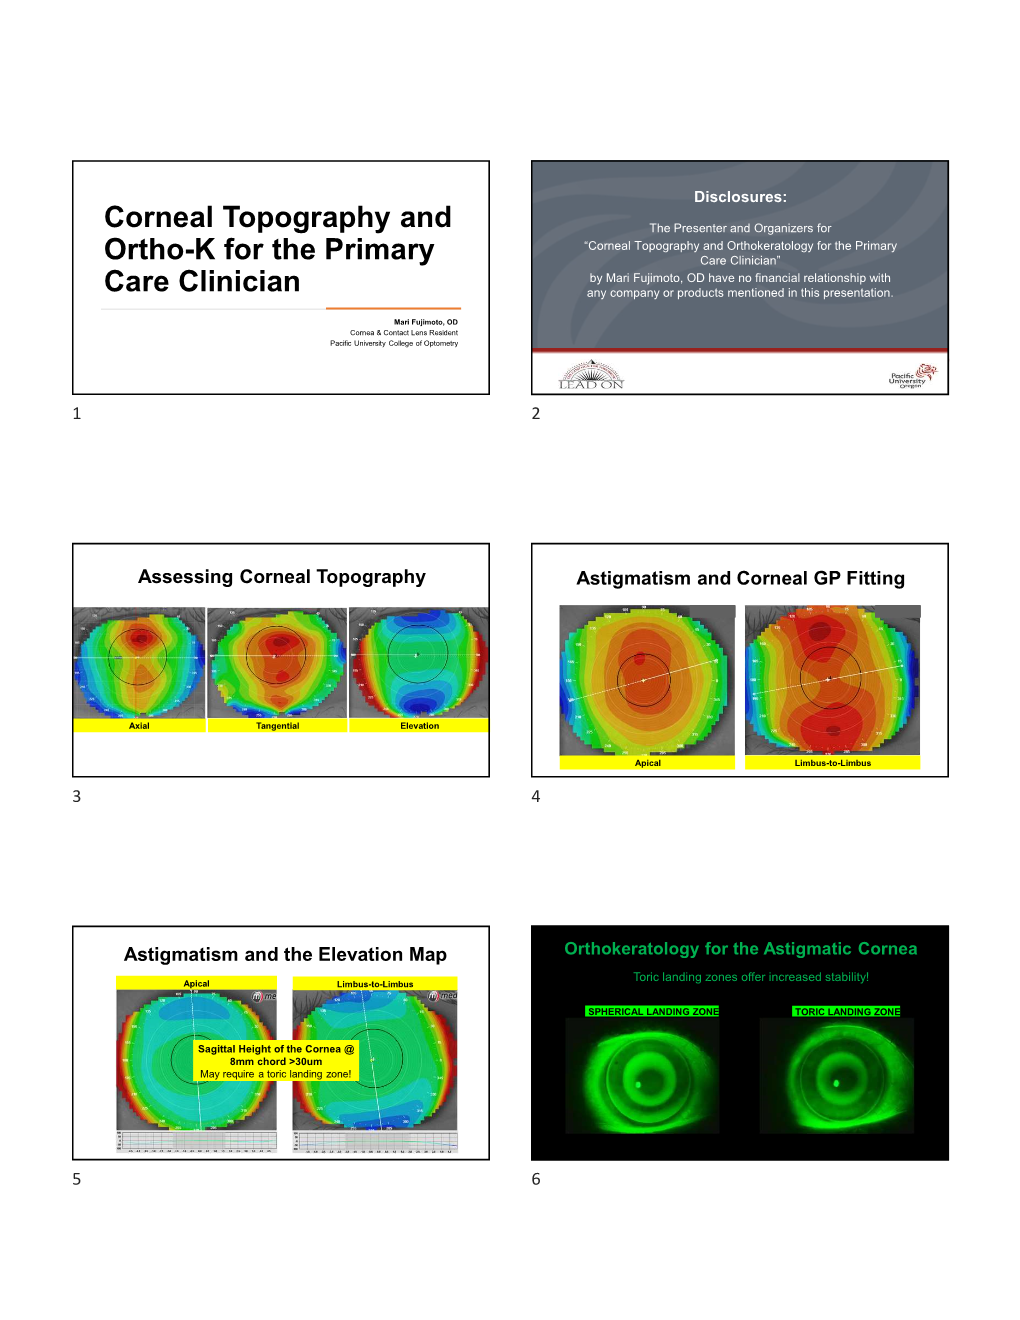 Corneal Topography and Ortho-K for the Primary Care Clinician